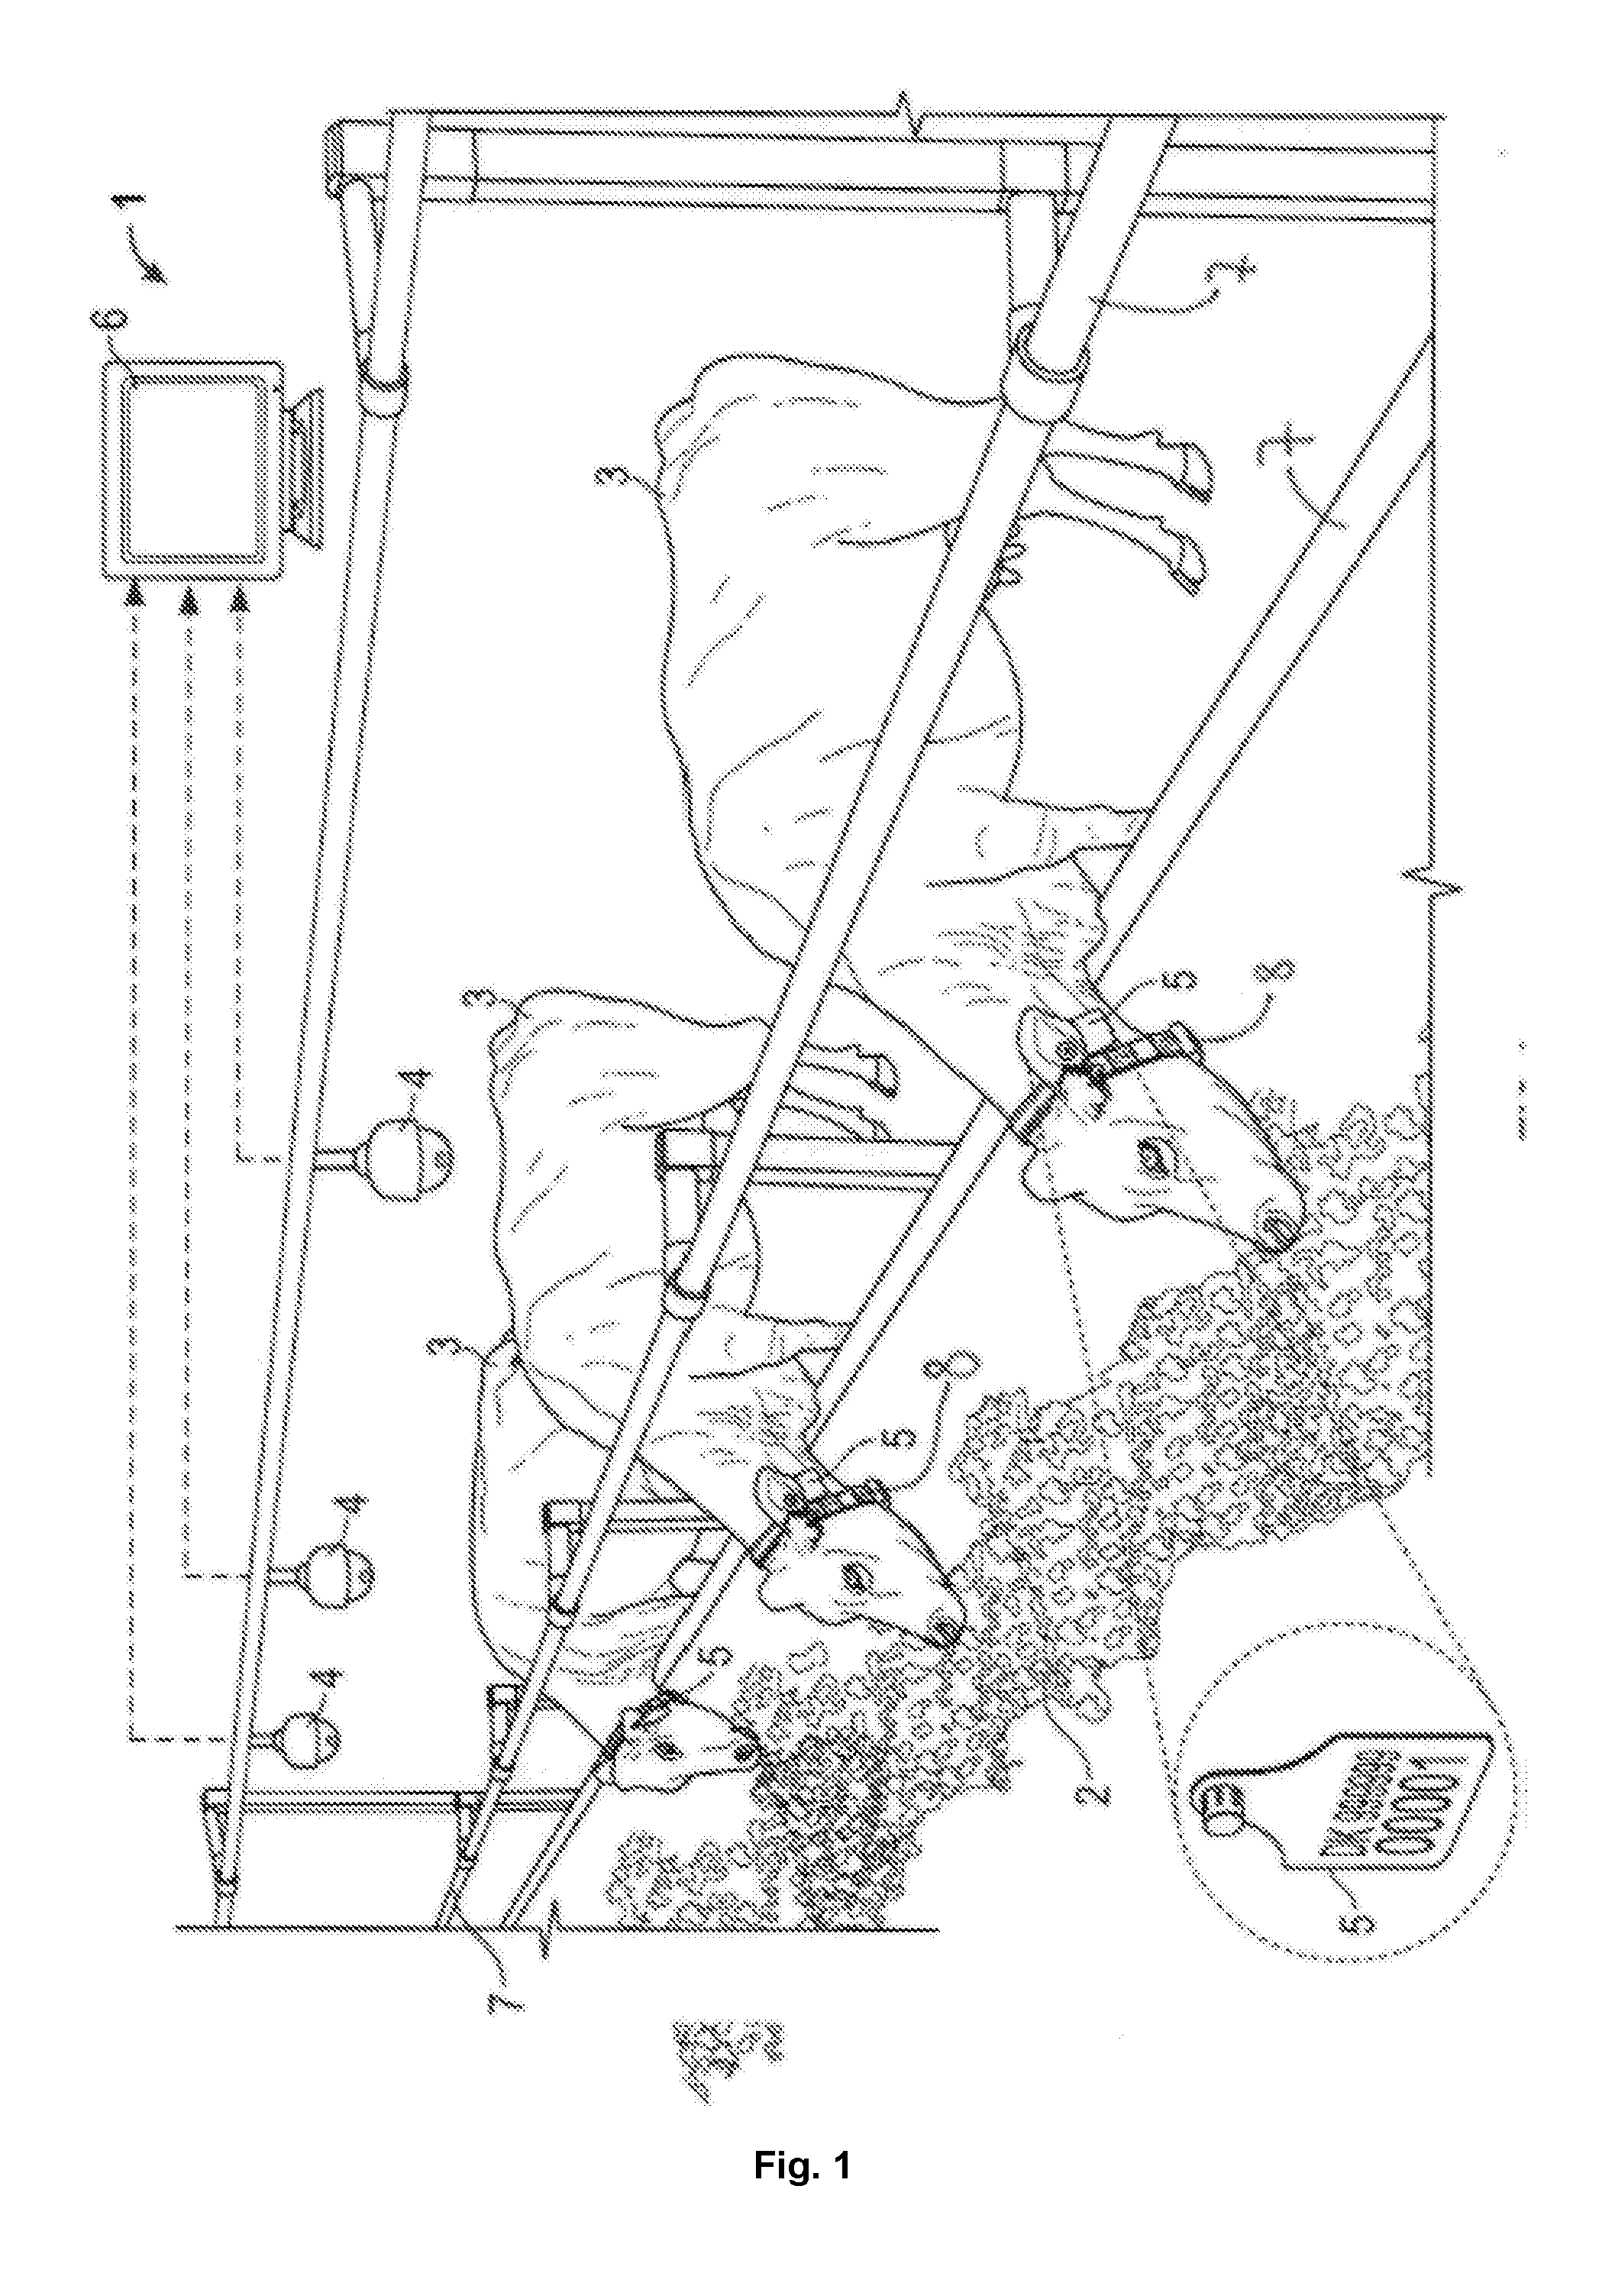 System for determining feed consumption of at least one animal